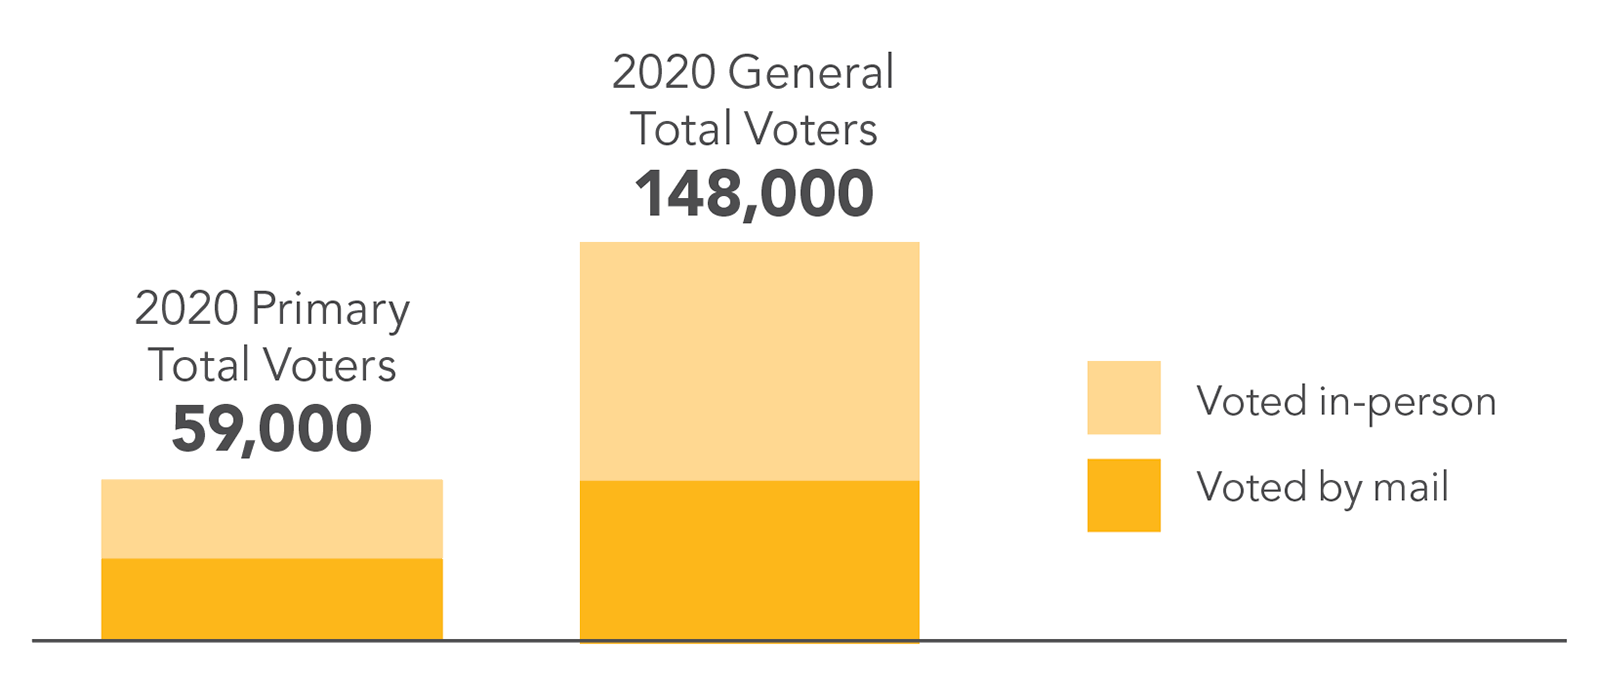 Bar graph comparing total voter counts for Cumberland County in 2020: 59,000 voters for the primary and 148,000 voters for the general election.